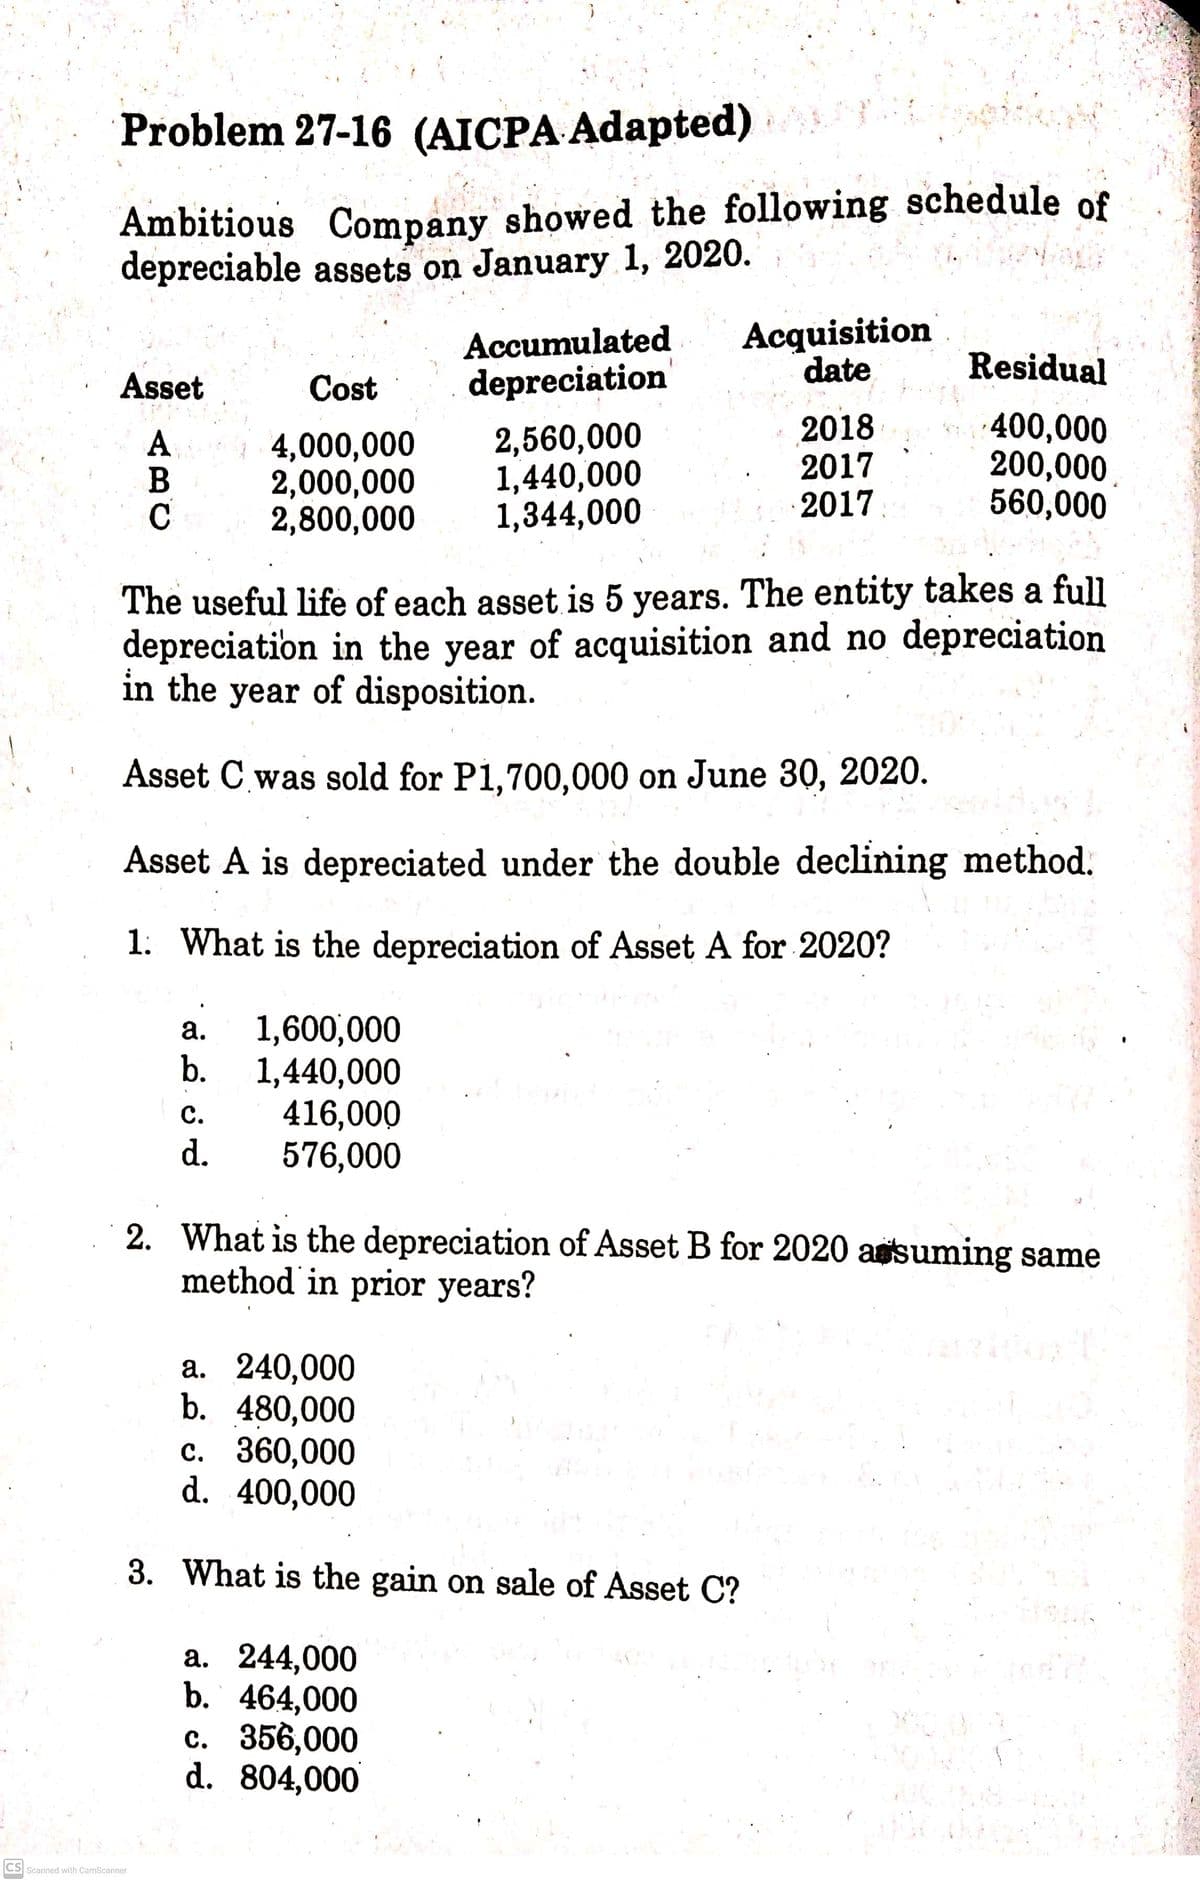 Problem 27-16 (AICPA Adapted)
Ambitious Company showed the following schedule of
depreciable assets on January 1, 2020.
Accumulated
depreciation
Acquisition
date
Residual
Asset
Cost
4,000,000
2,000,000
2,800,000
2,560,000
1,440,000
1,344,000
2018
2017
2017
400,000
200,000.
560,000
The useful life of each asset is 5 years. The entity takes a full
depreciation in the year of acquisition and no depreciation
in the year of disposition.
Asset C was sold for P1,700,000 on June 3ọ, 2020.
O on
Asset A is depreciated under the double declining method.
1: What is the depreciation of Asset A for 2020?
1,600,000
b.
а.
1,440,000
416,000
576,000
с.
d.
2. What is the depreciation of Asset B for 2020 ansuming same
method in prior years?
а. 240,000
b. 480,000
c. 360,000
d. 400,000
3. What is the gain on sale of Asset C?
a. 244,000
b. 464,000
c. 356,000
d. 804,000
CS Scanned with CamScanner
ABC
